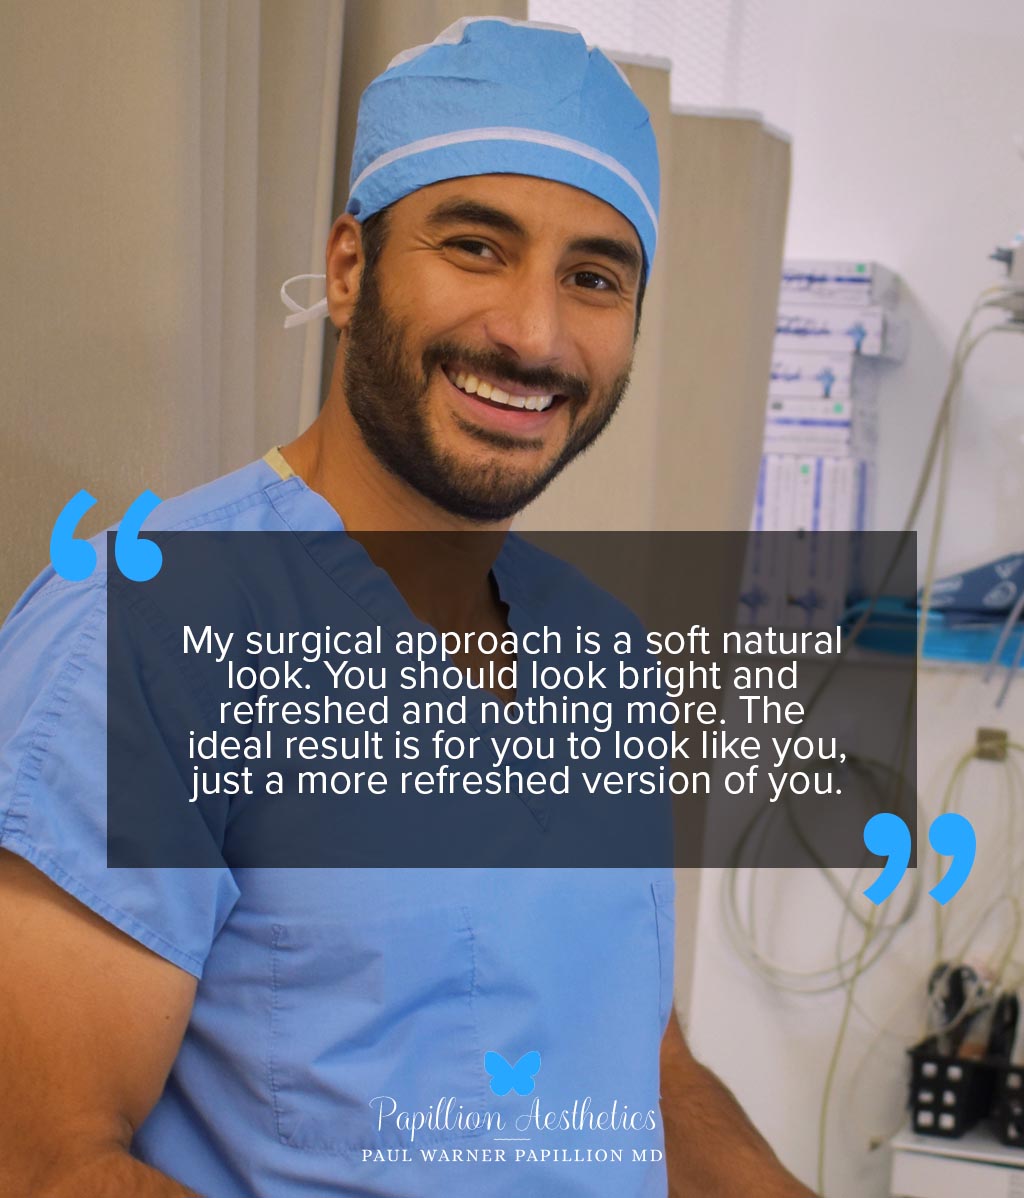 My surgical approach is a soft natural look. You should look bright and refreshed and nothing more. The ideal result is for you to look like you, just a more refreshed version of you.